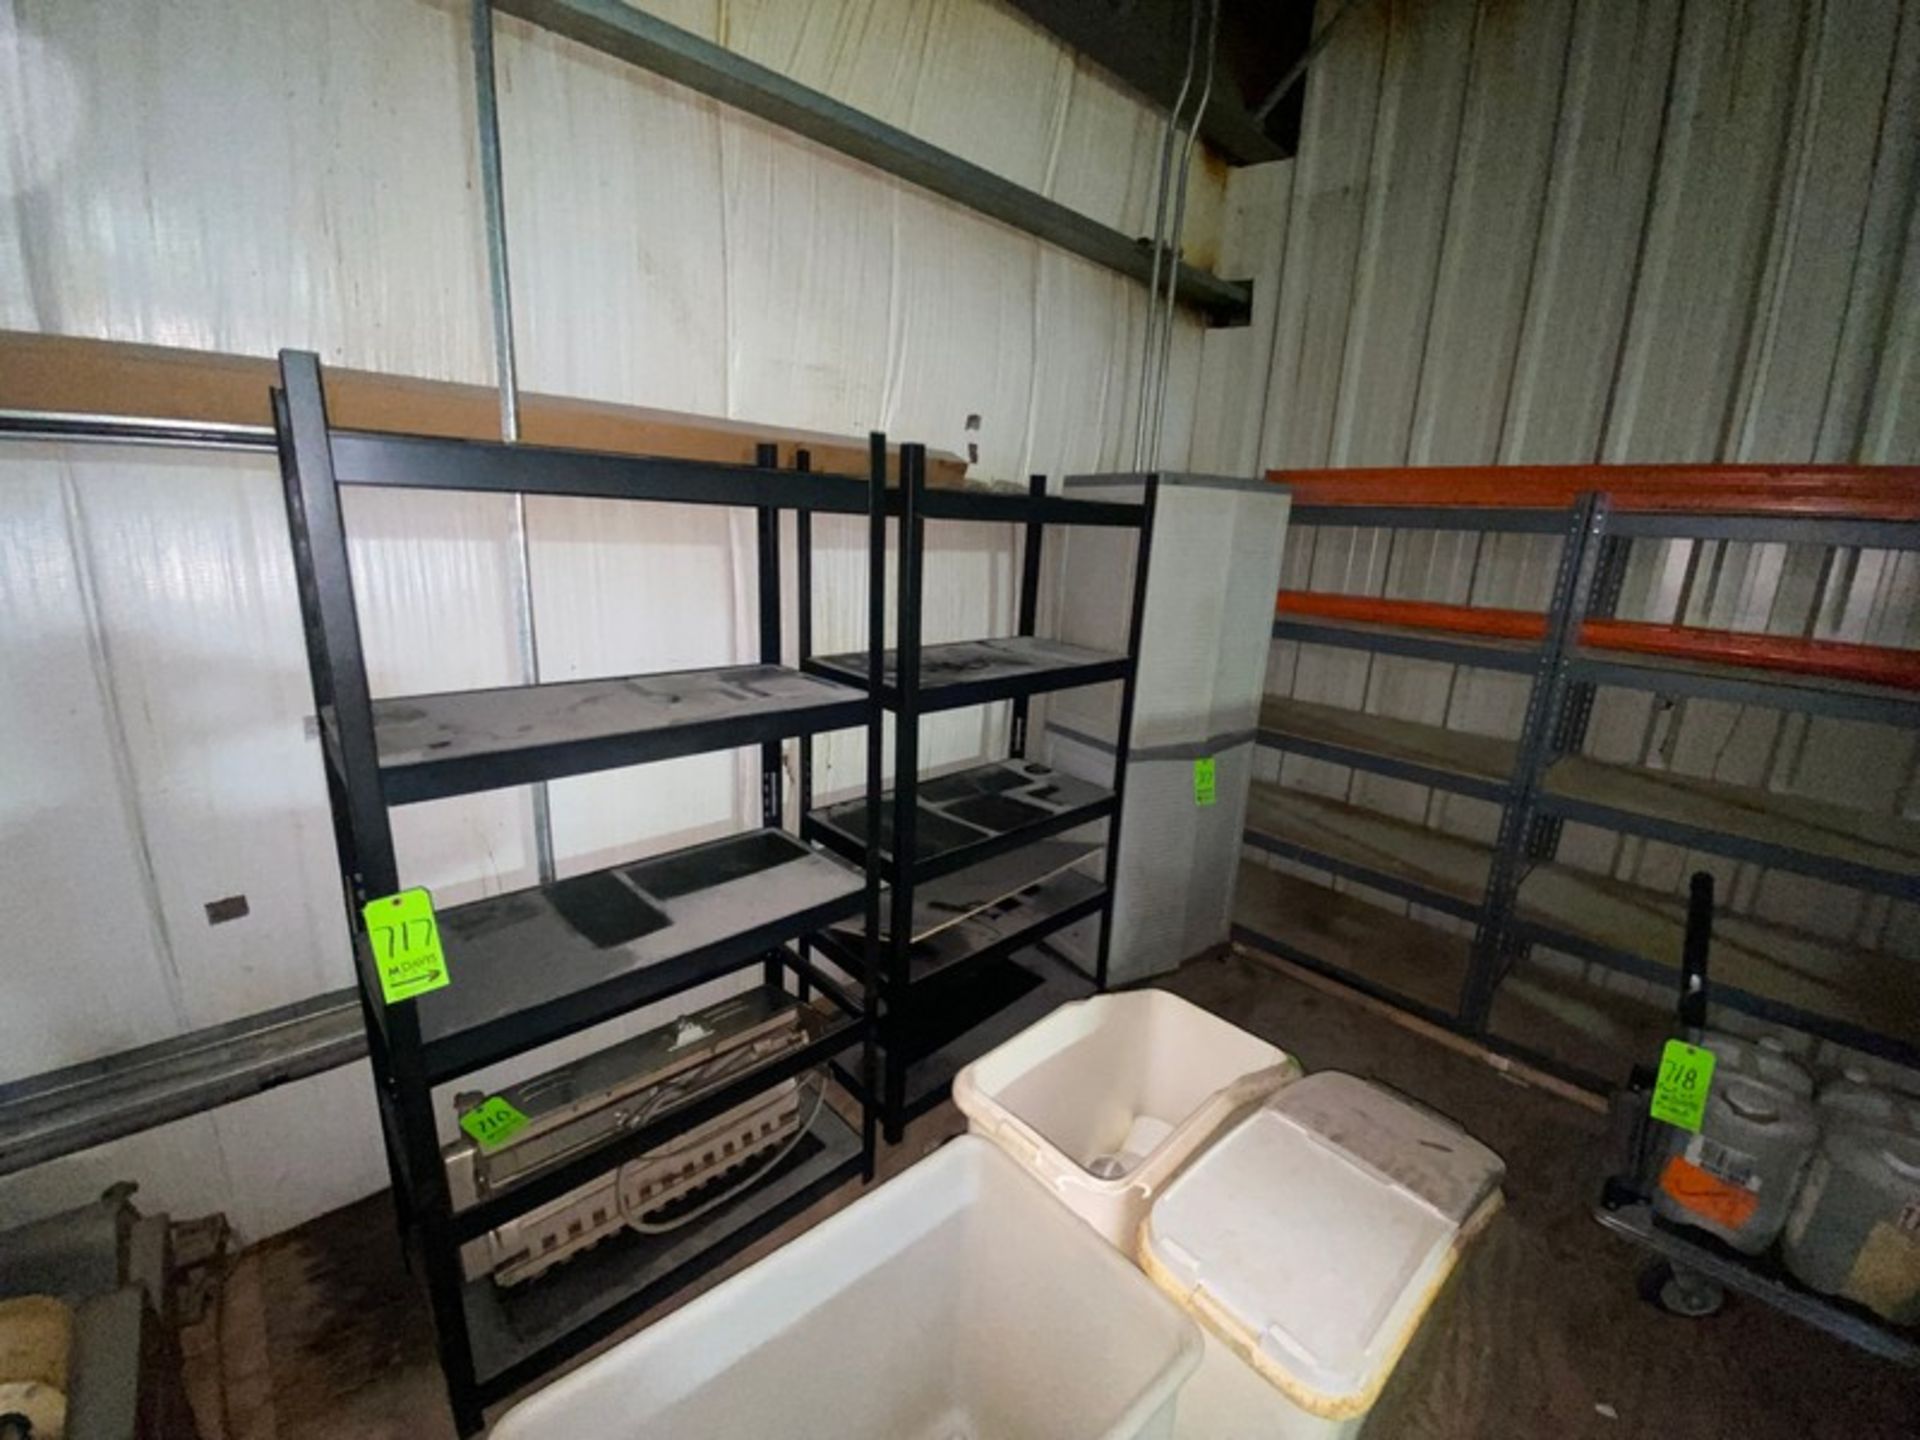 (2) SHELVING UNITS, WITH (1) PLASTIC LOCKER UNIT (LOCATED IN HERMINIE, PA)